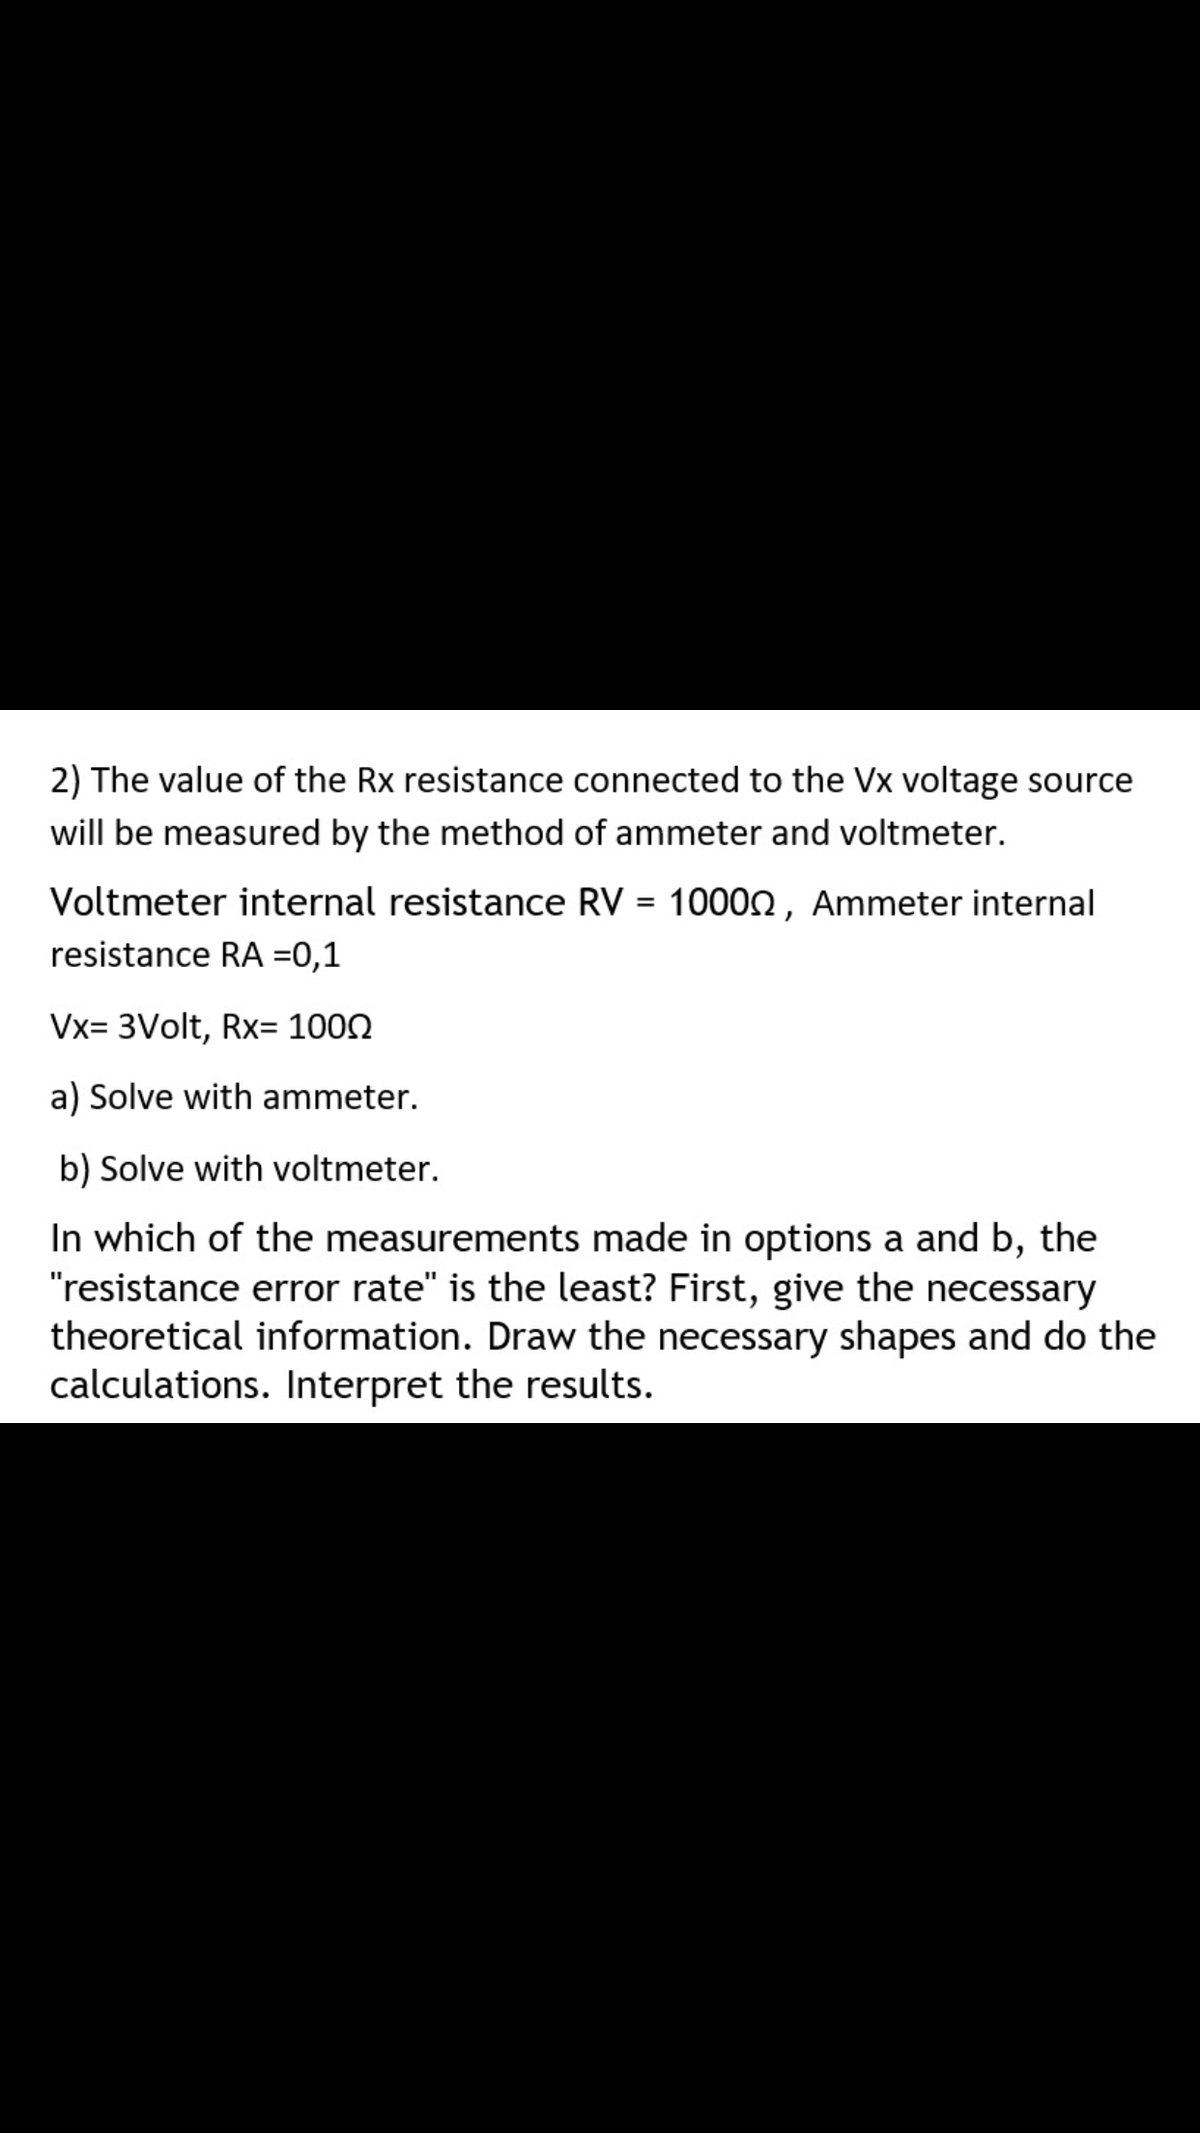 2) The value of the Rx resistance connected to the Vx voltage source
will be measured by the method of ammeter and voltmeter.
Voltmeter internal resistance RV = 10000 , Ammeter internal
resistance RA =0,1
Vx= 3Volt, Rx= 1002
a) Solve with ammeter.
b) Solve with voltmeter.
In which of the measurements made in options a and b, the
"resistance error rate" is the least? First, give the necessary
theoretical information. Draw the necessary shapes and do the
calculations. Interpret the results.
